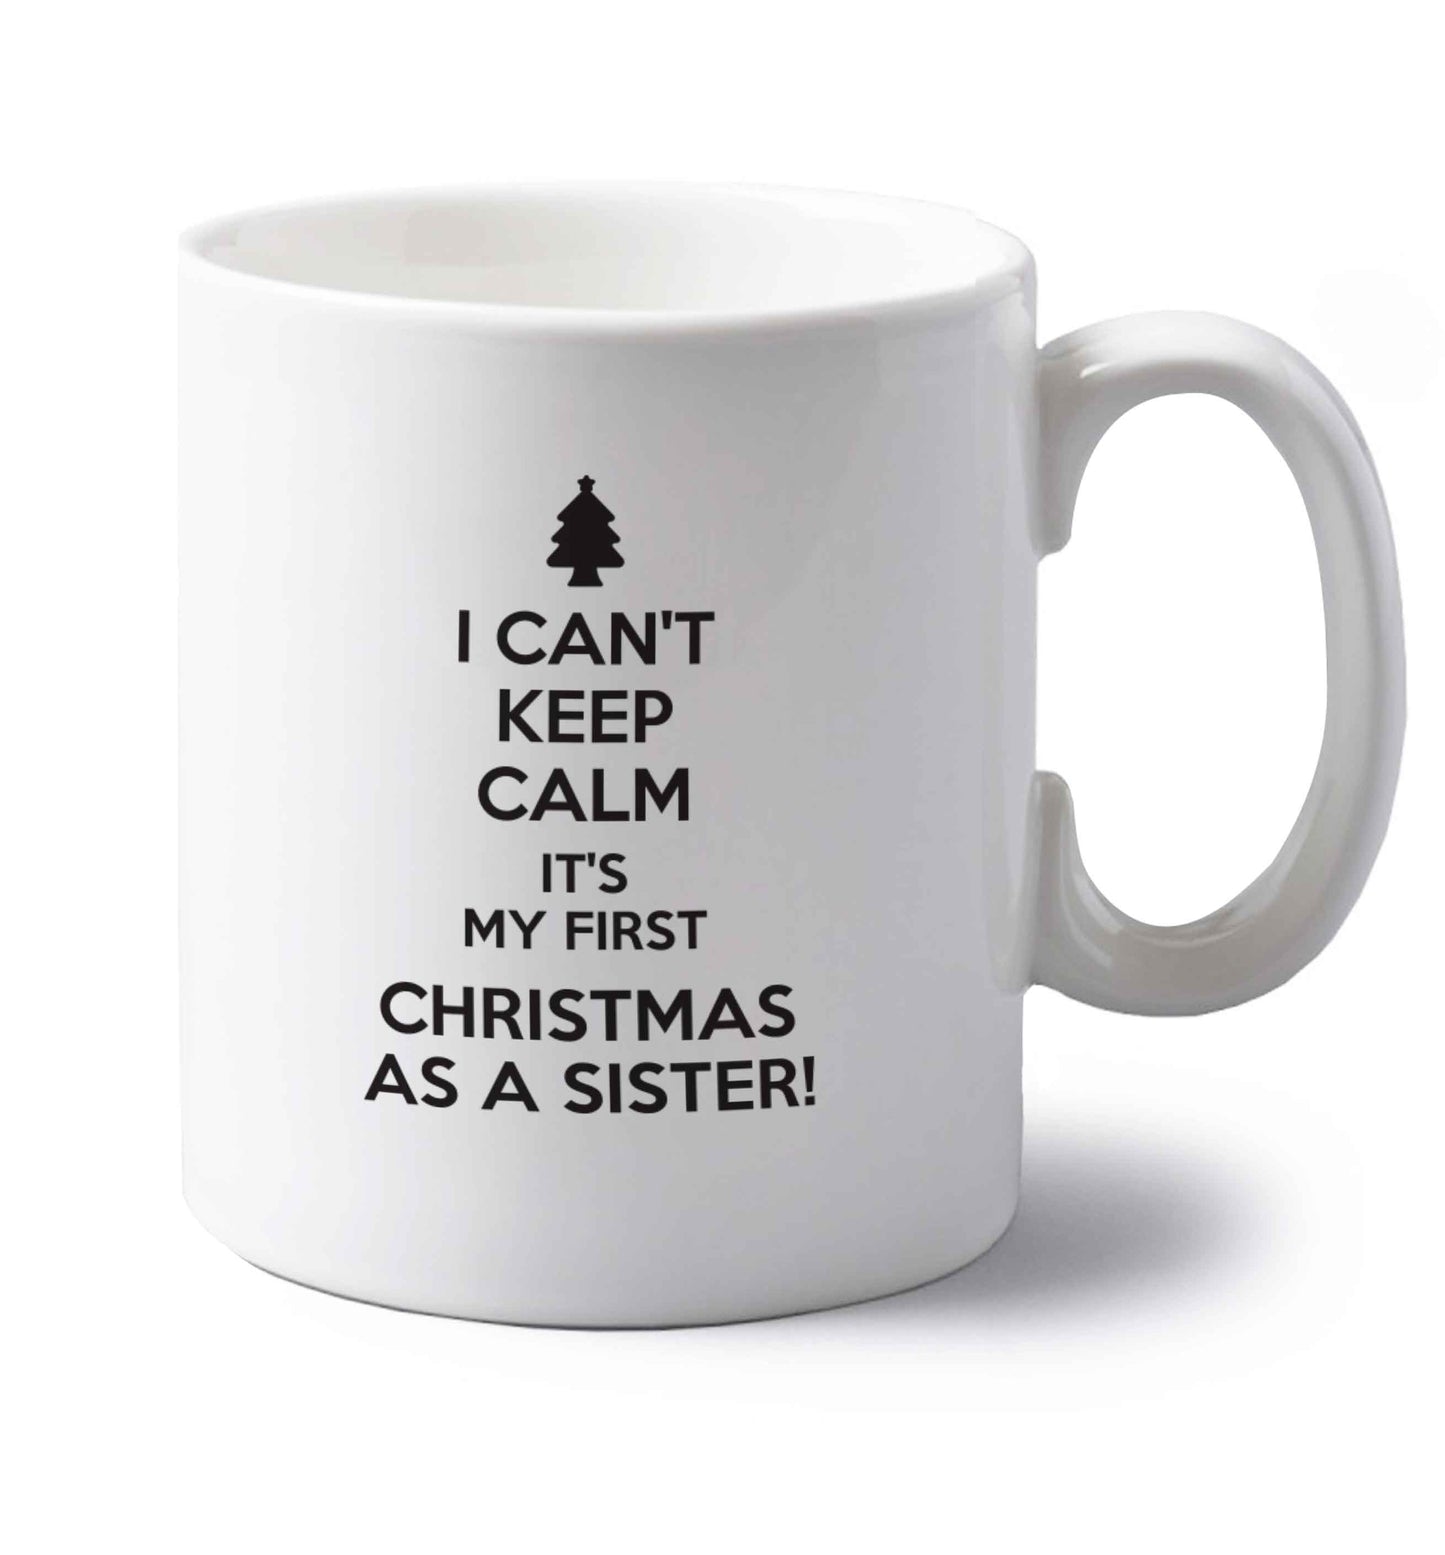 I can't keep calm it's my first Christmas as a sister! left handed white ceramic mug 